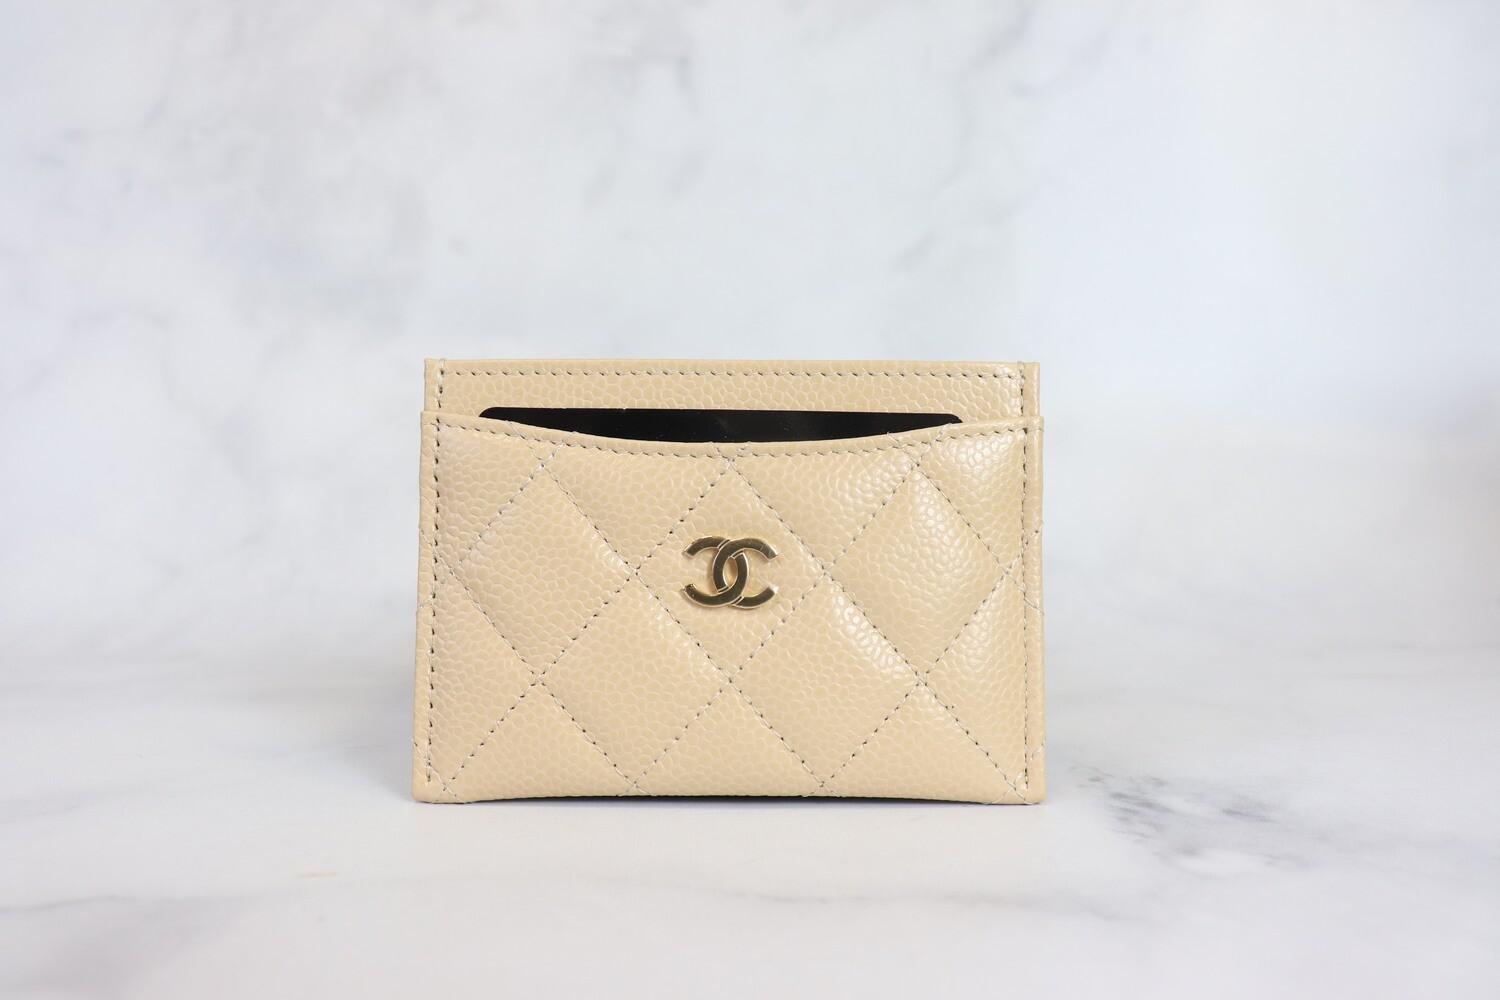 Chanel SLG Card Holder Beige Caviar Leather, Gold Hardware, New in Box